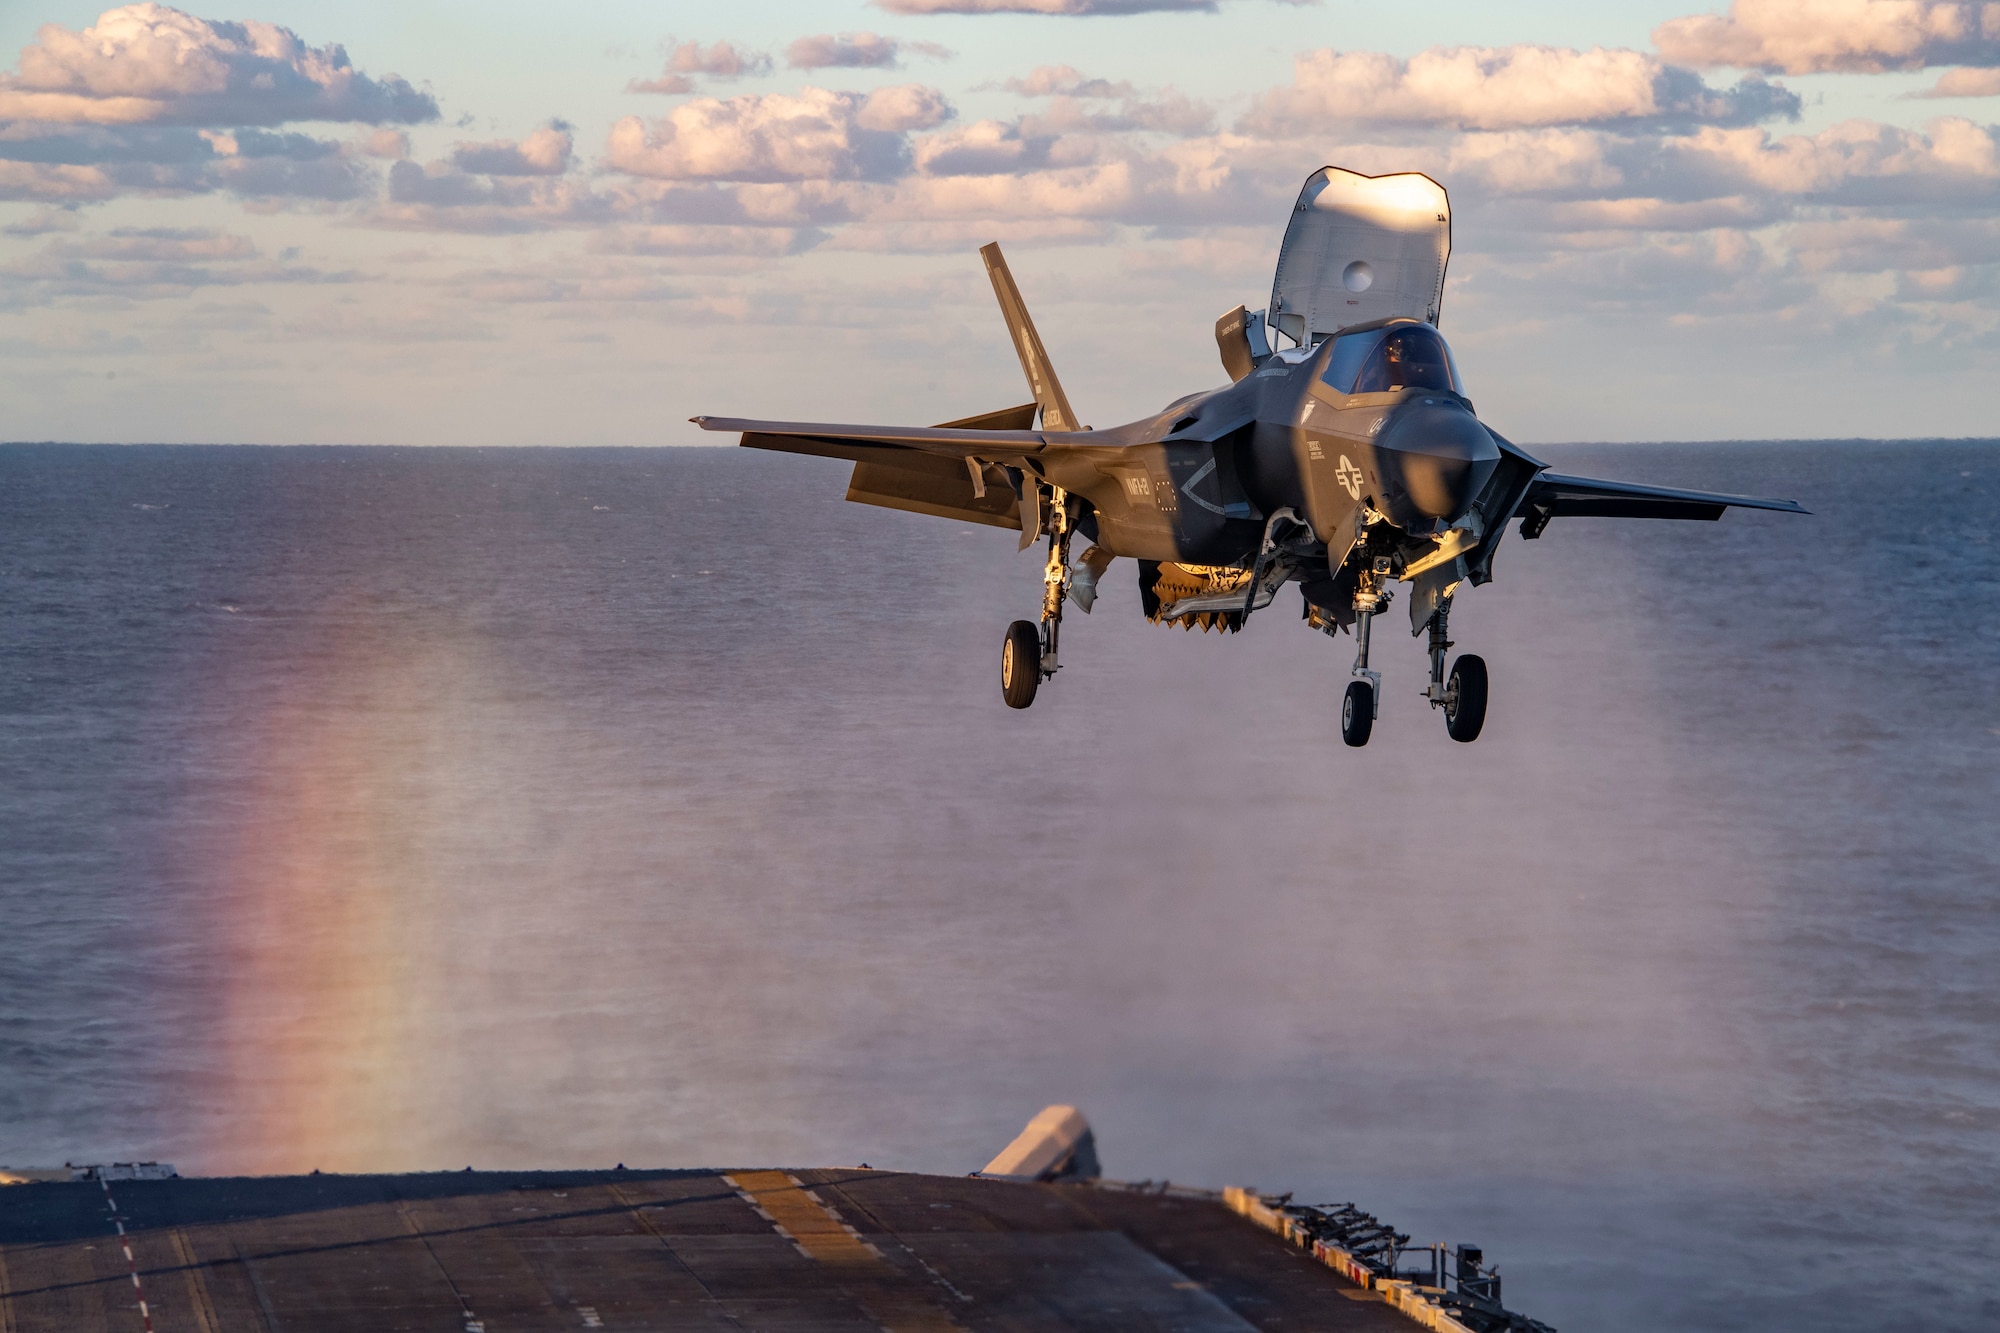 An F-35B Lightning fighter aircraft from the 31st Marine Expeditionary Unit lands on the flight deck of the forward-deployed amphibious assault ship USS America (LHA 6) during Exercise Talisman Sabre 21.